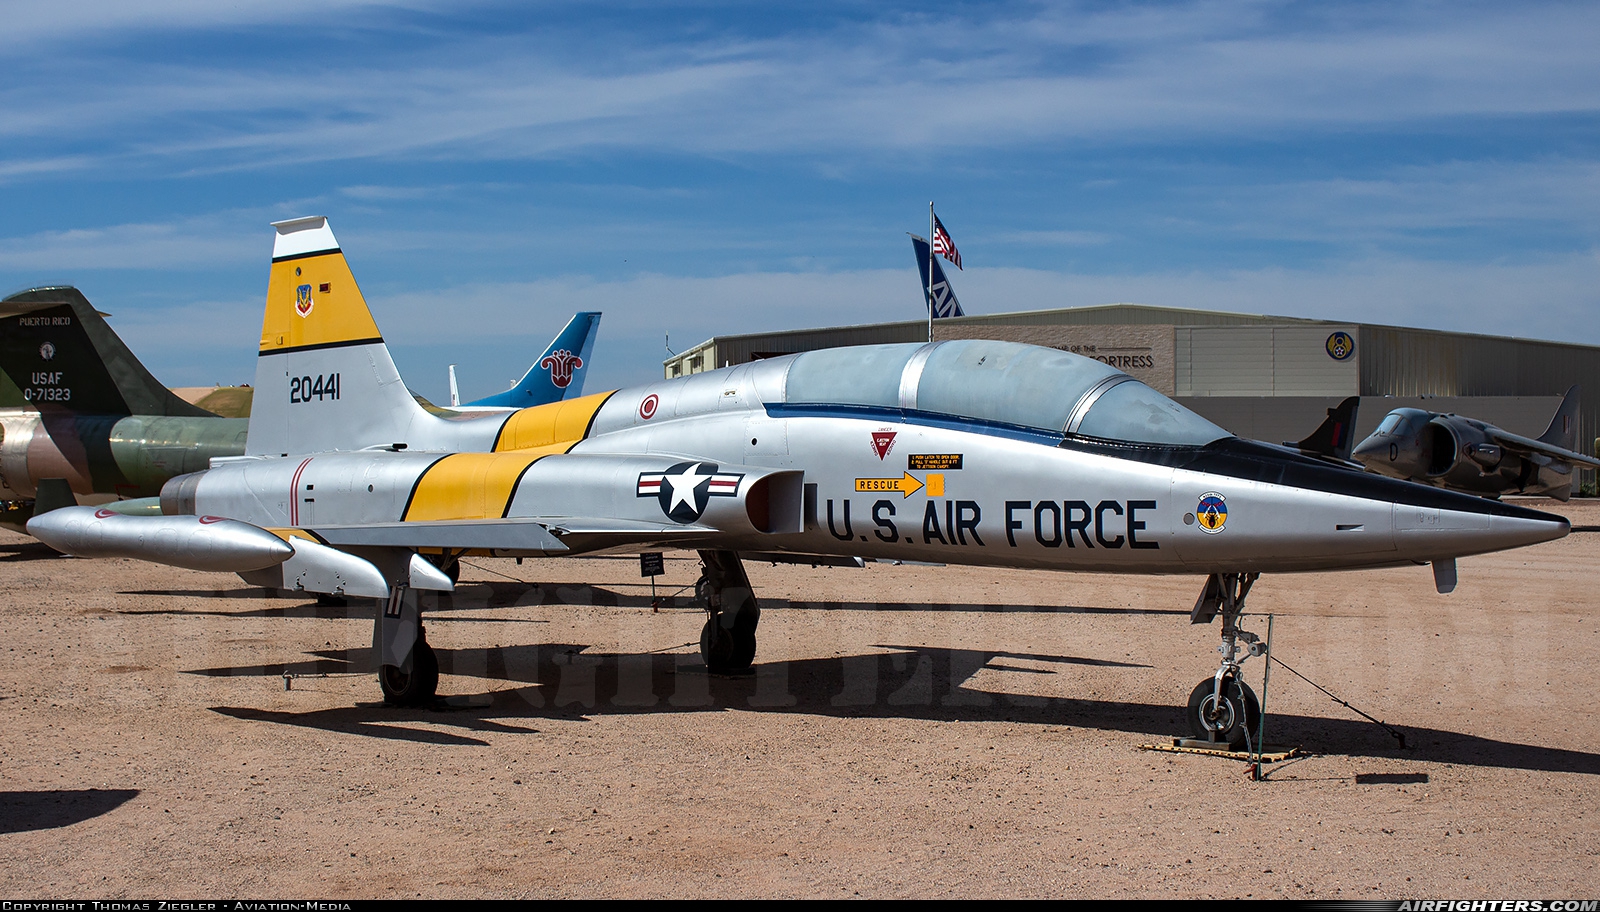 USA - Air Force Northrop F-5B Freedom Fighter 72-0441 at Tucson - Pima Air and Space Museum, USA